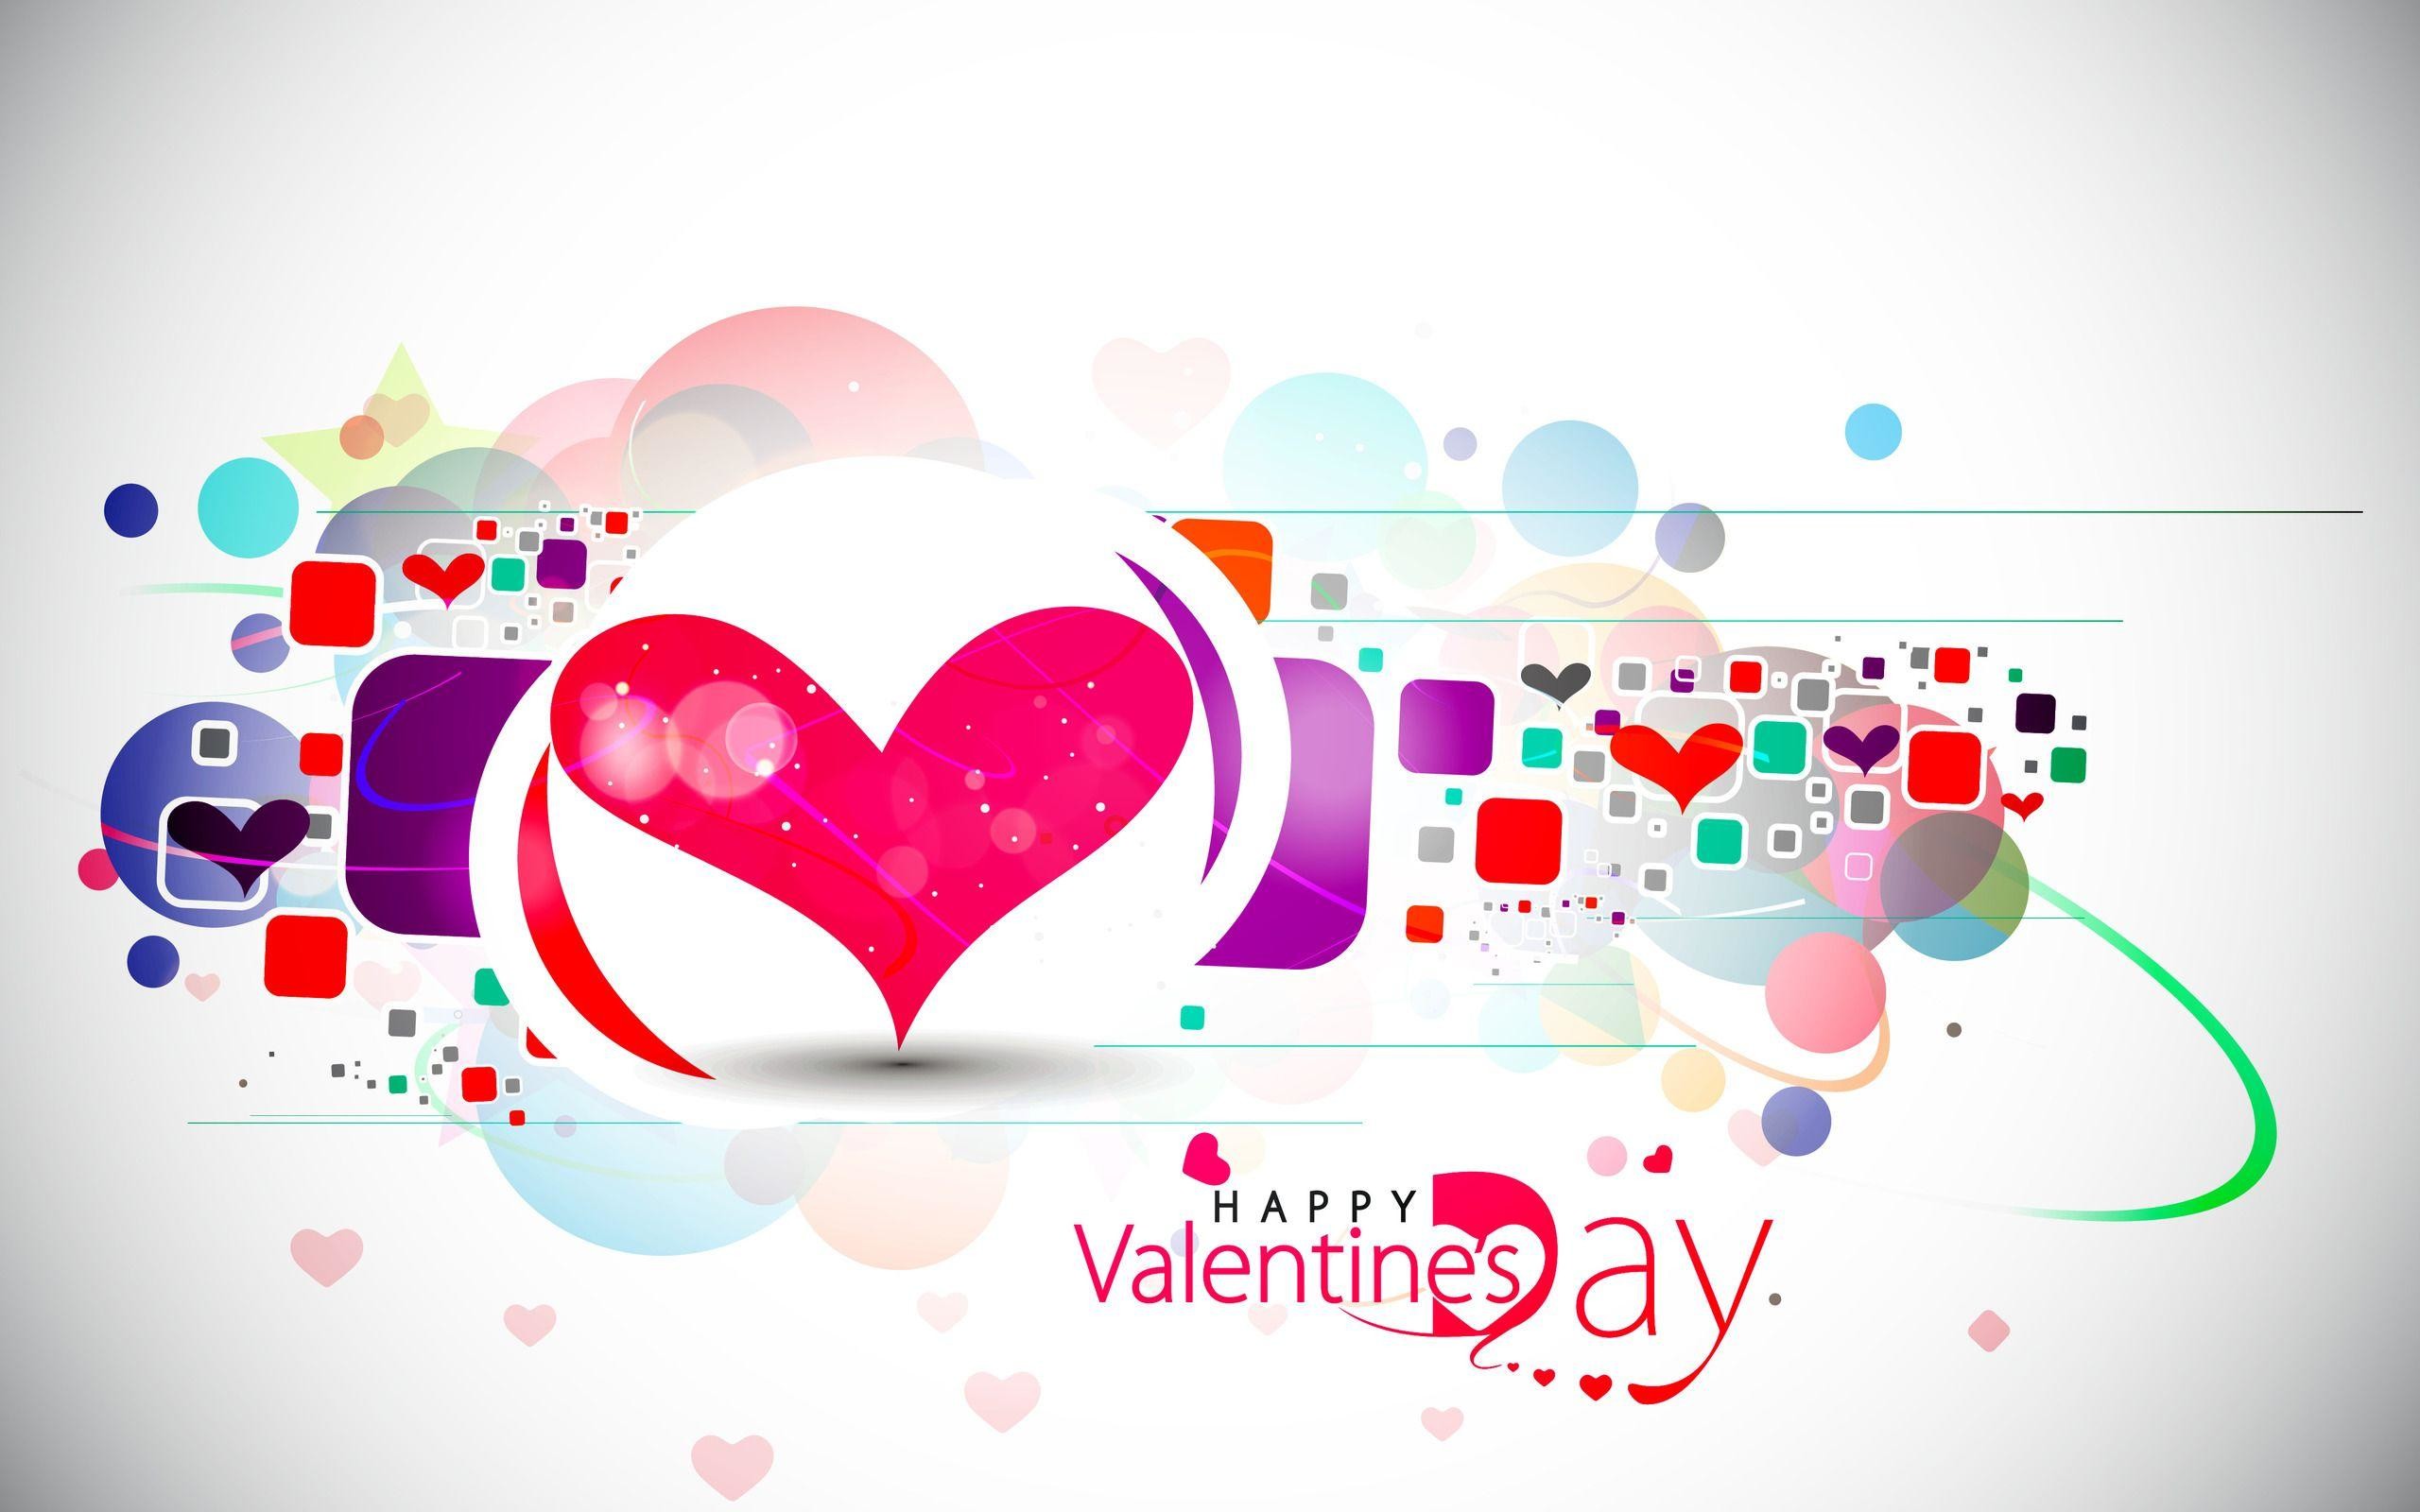 2560x1600 794 best Valentine's Day Wallpapers!! images on Pinterest